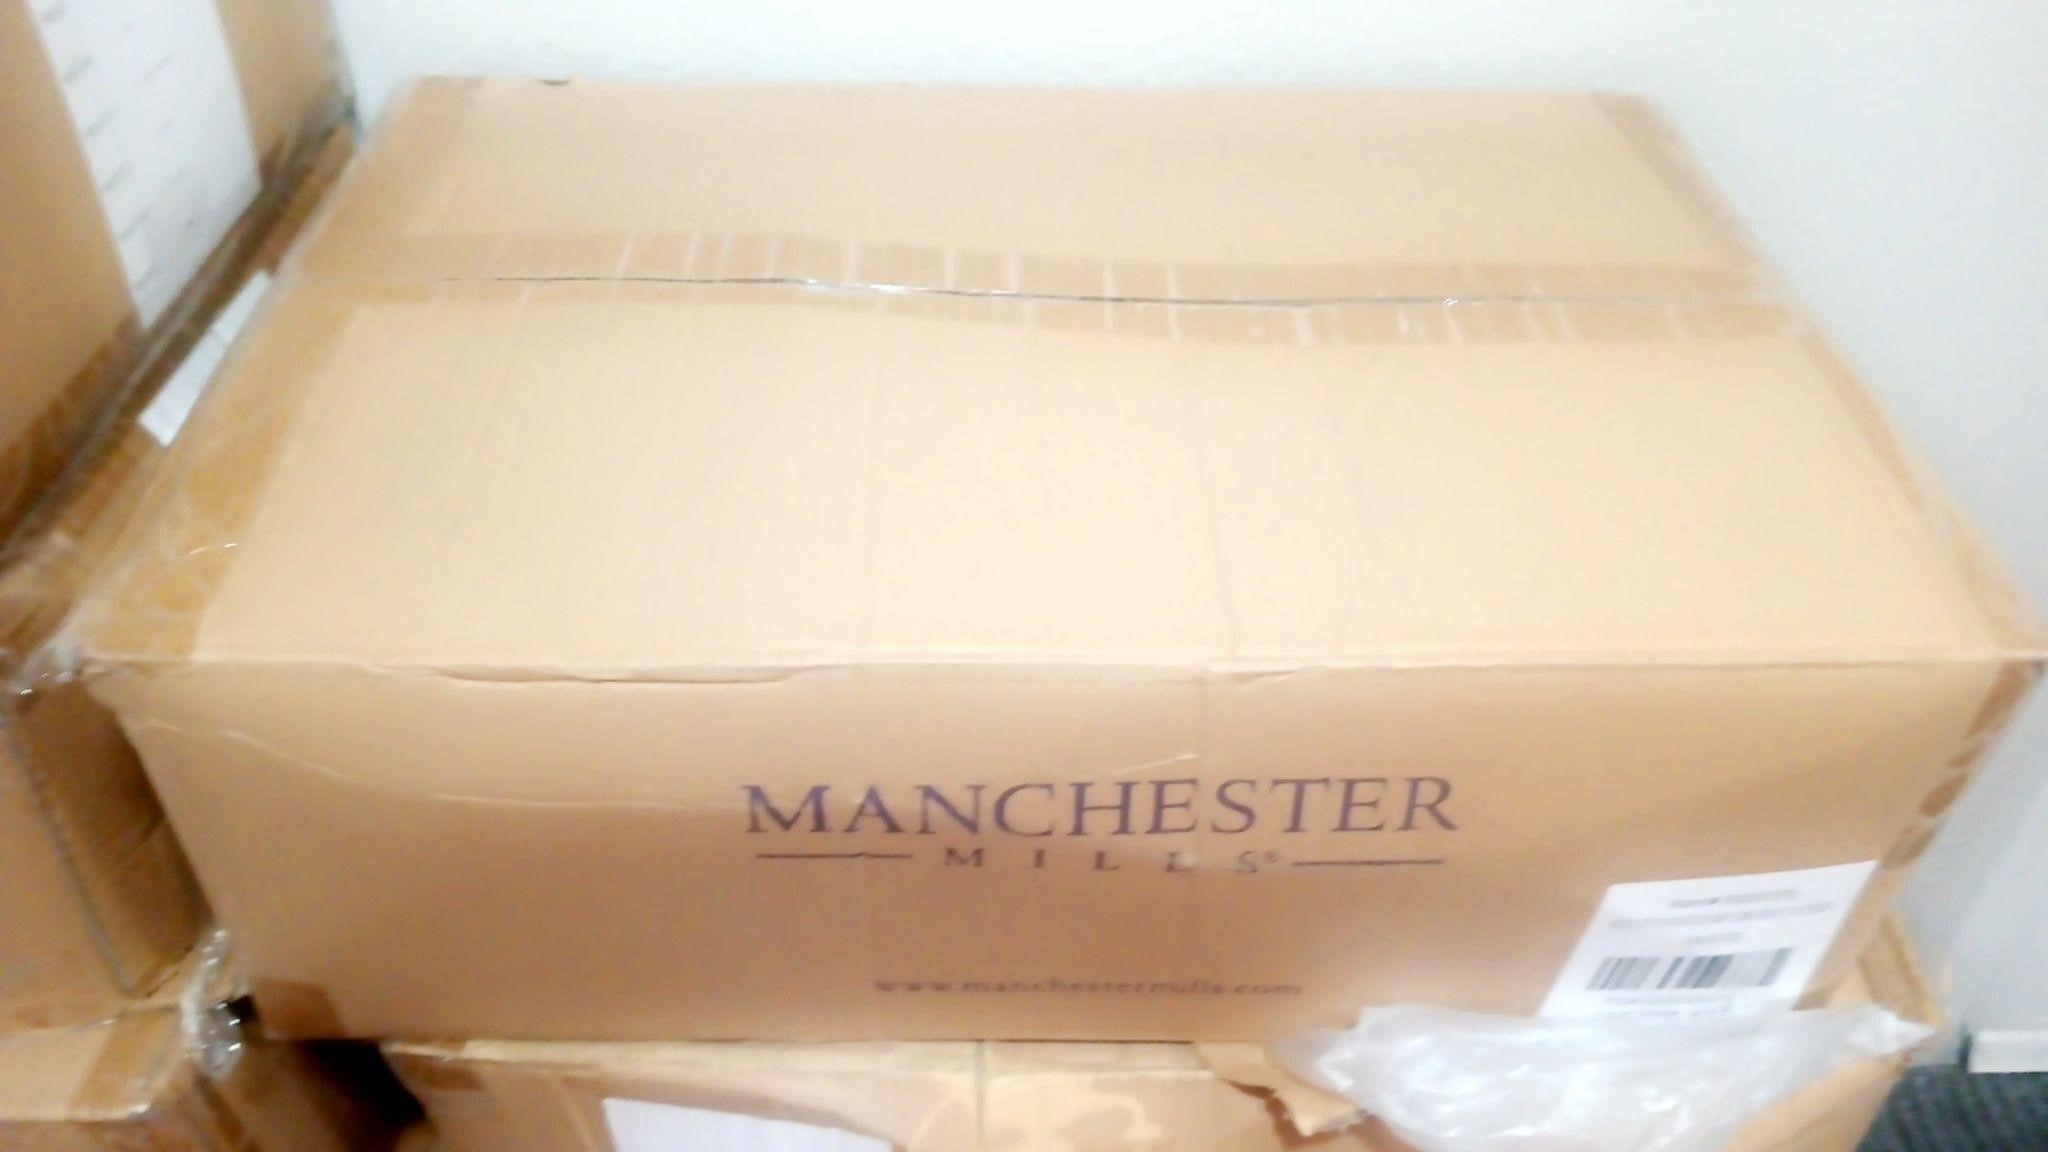 MAN CHESTER MILLS QUEEN SIZE SHEETS